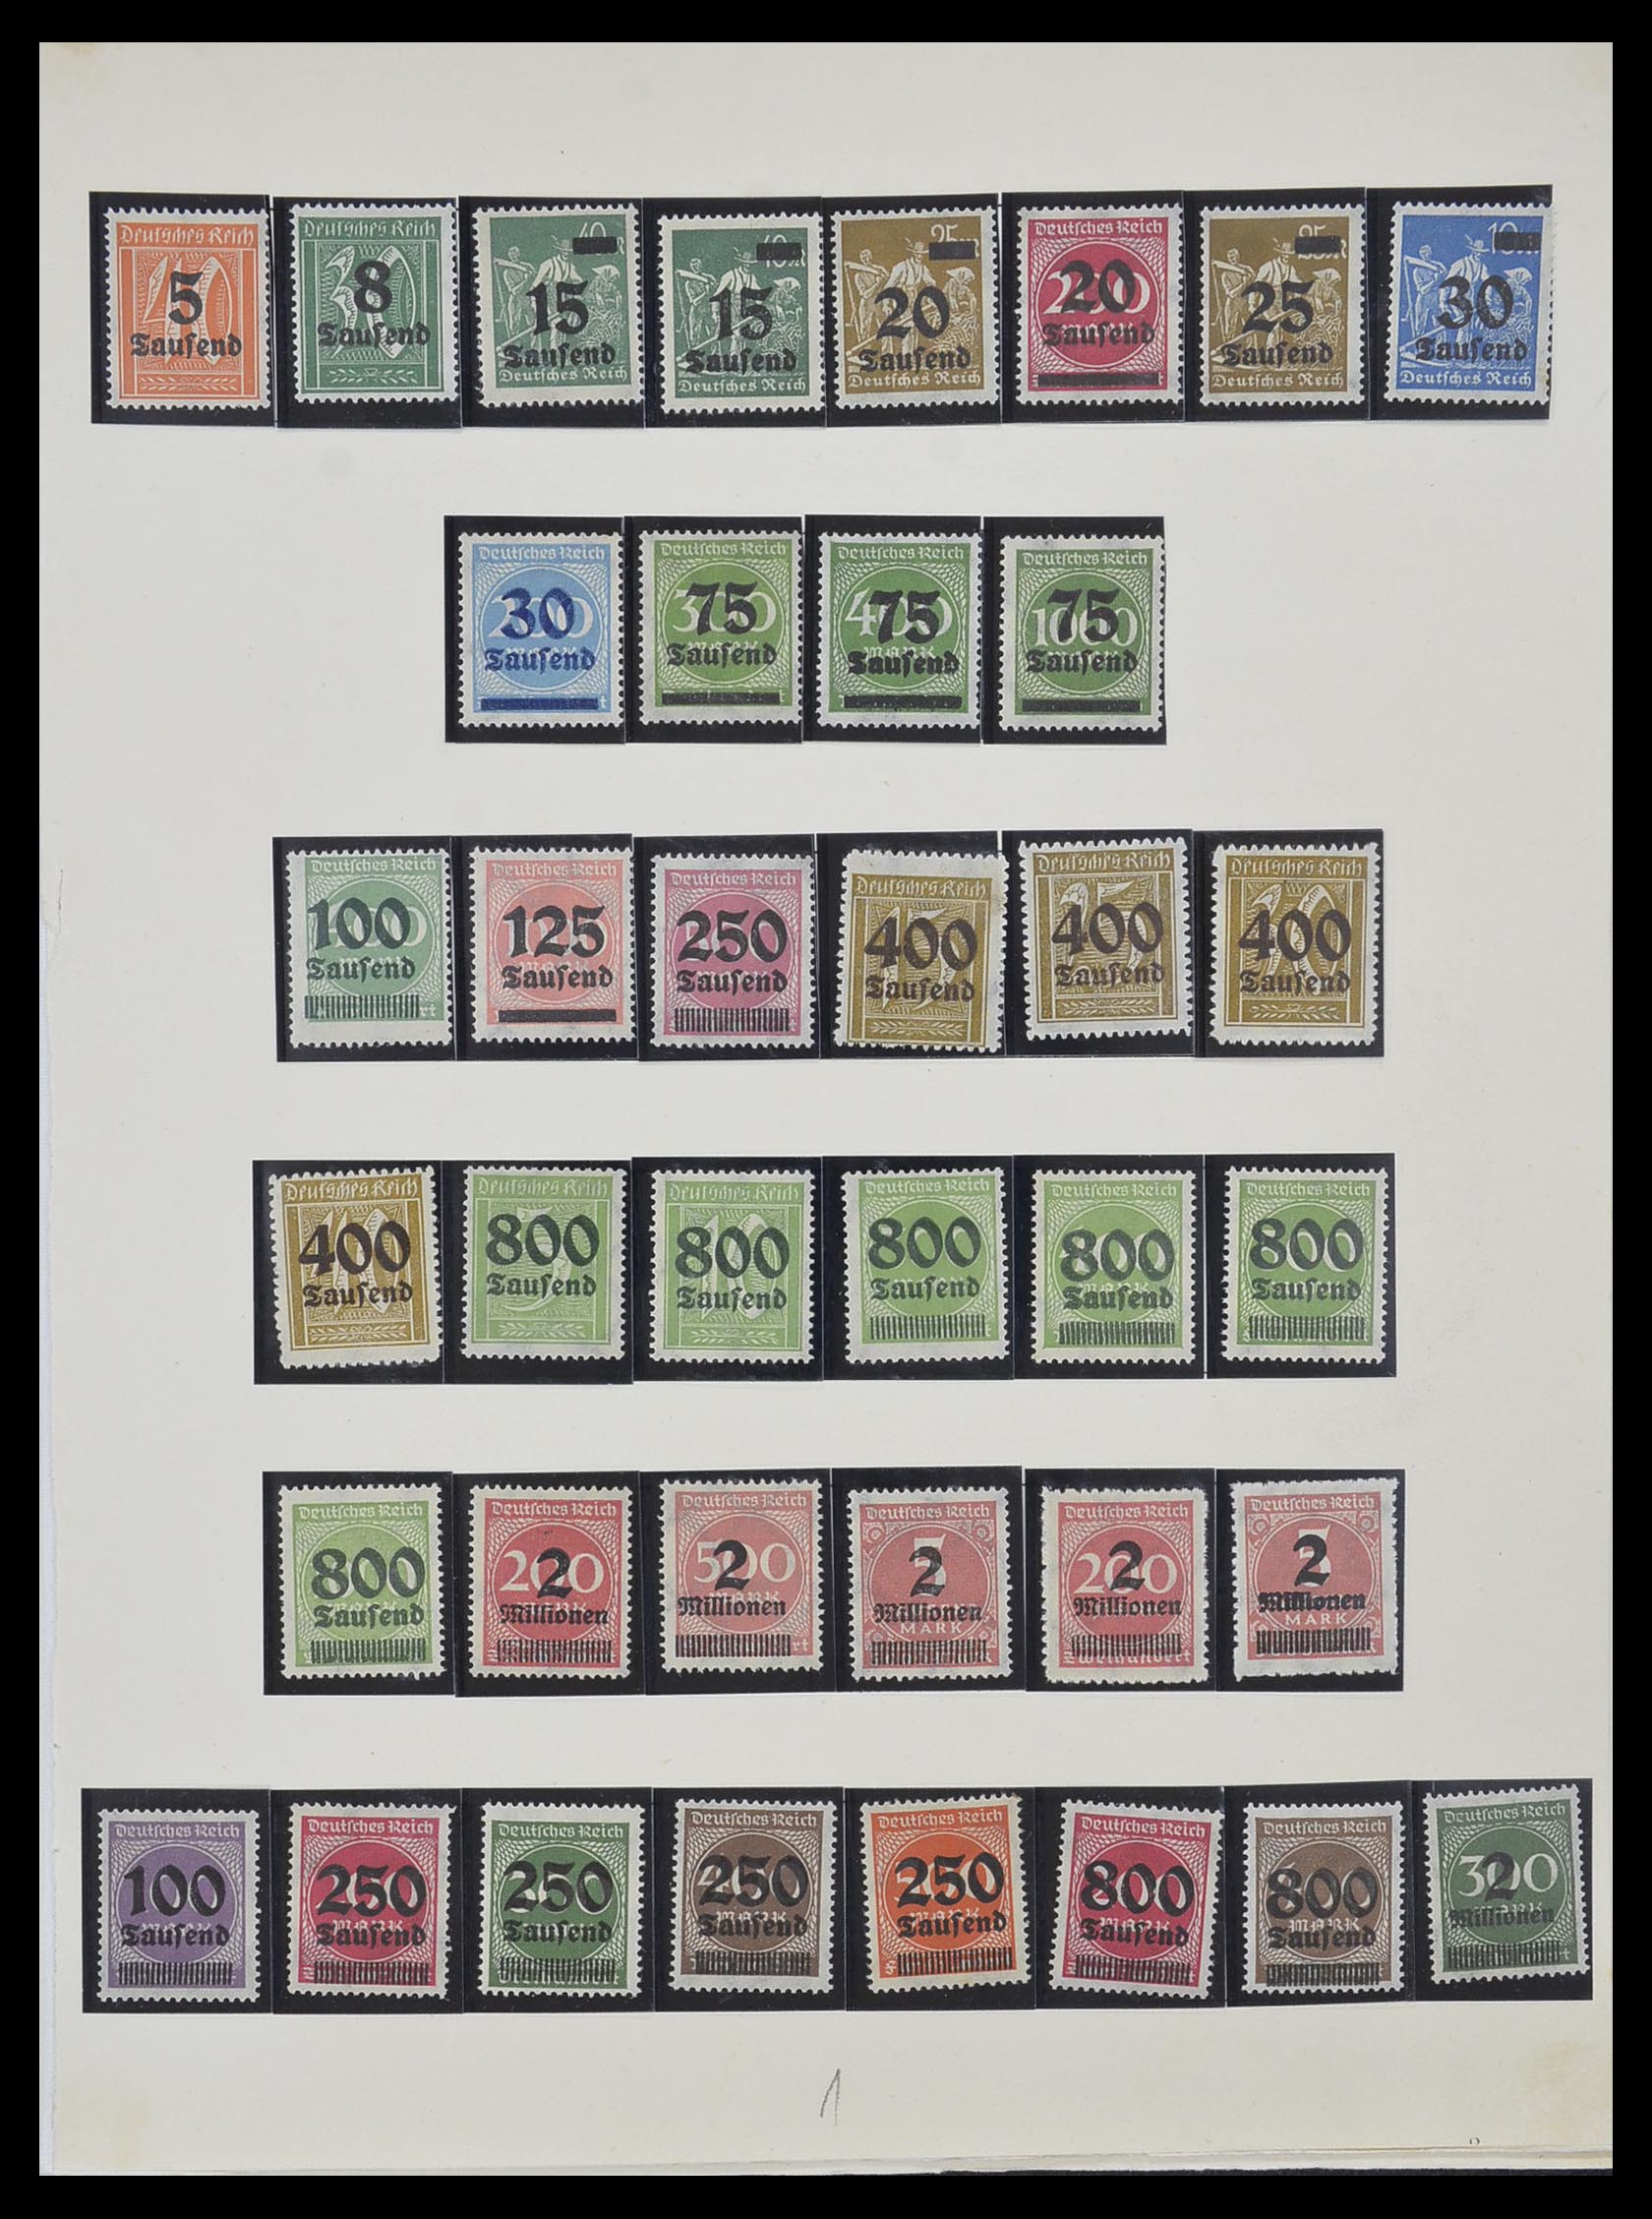 33957 001 - Stamp collection 33957 German Reich infla 1923.